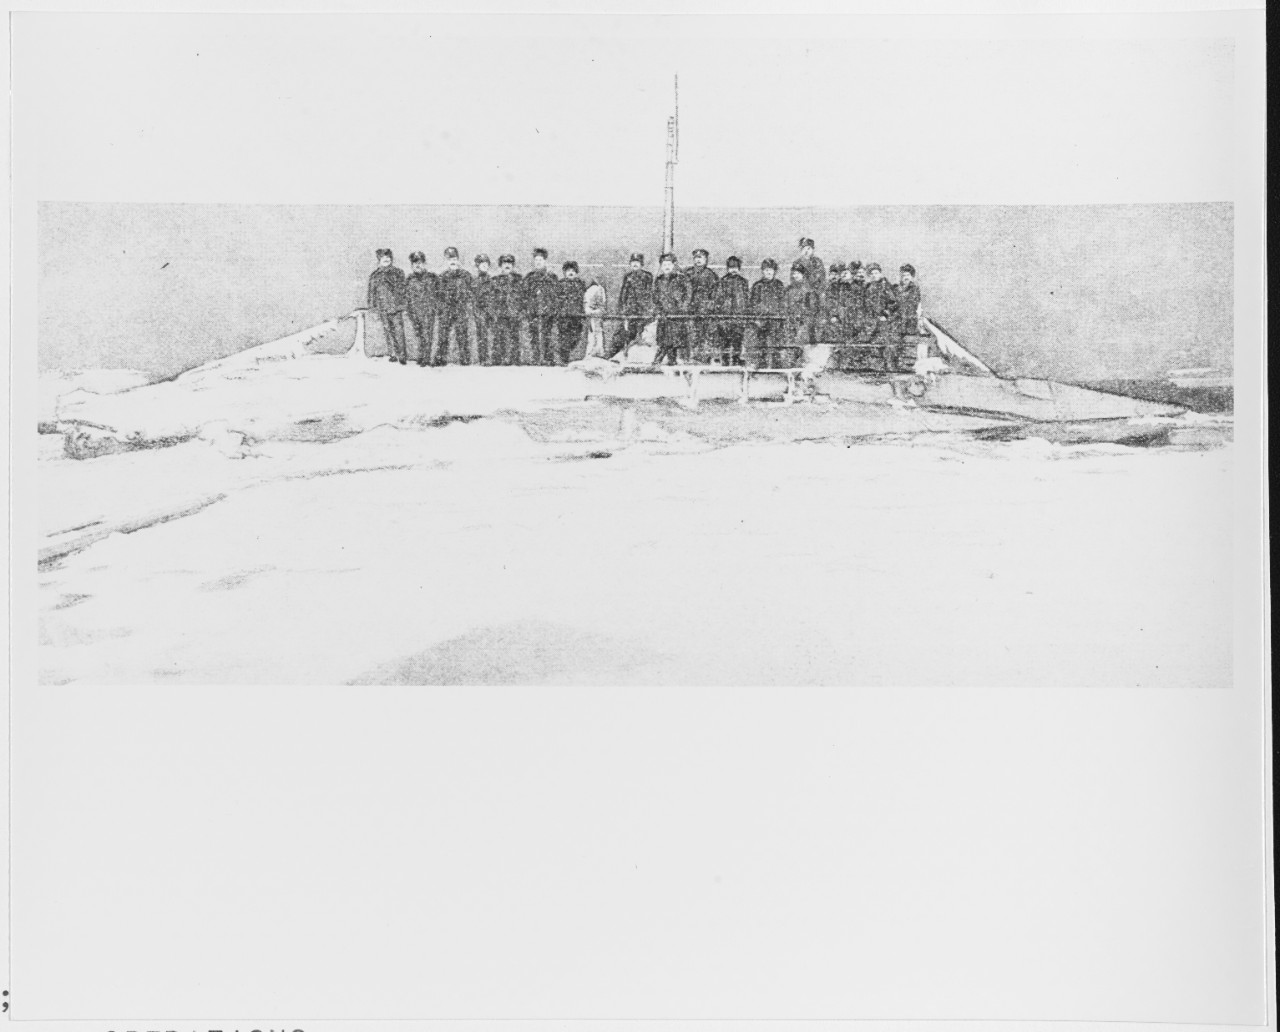 Russian Navy "Holland" type submarine in icy conditions, circa 1913-1914.